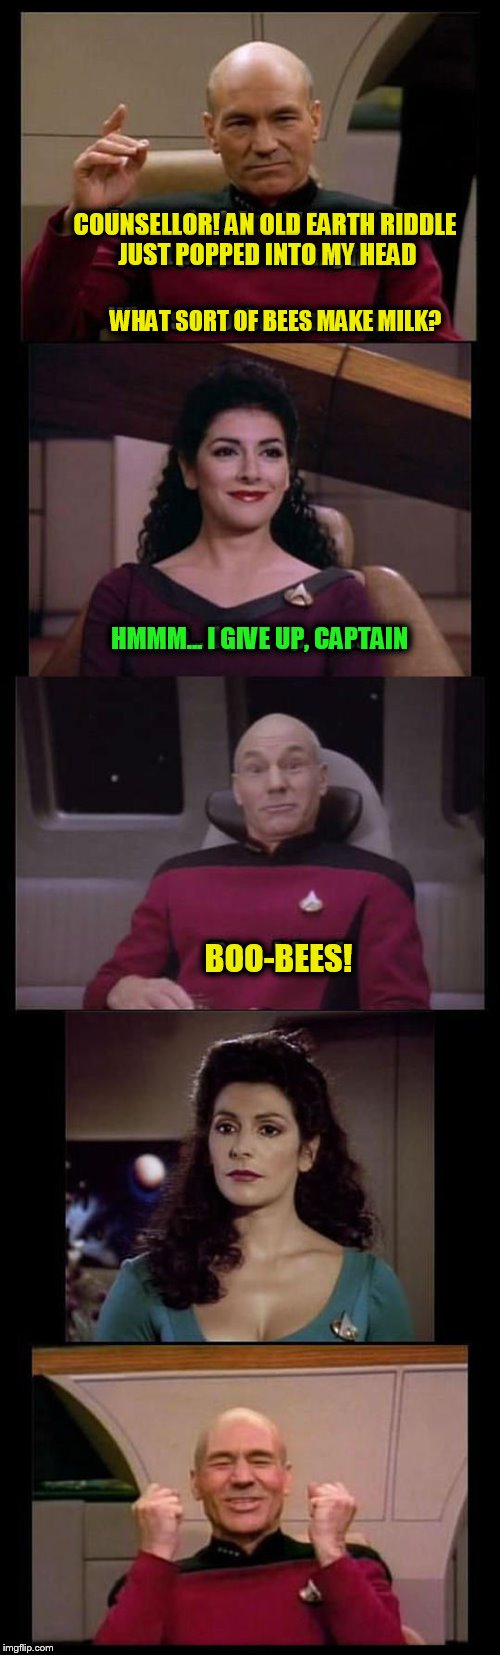 COUNSELLOR! AN OLD EARTH RIDDLE JUST POPPED INTO MY HEAD BOO-BEES! WHAT SORT OF BEES MAKE MILK? HMMM... I GIVE UP, CAPTAIN | made w/ Imgflip meme maker